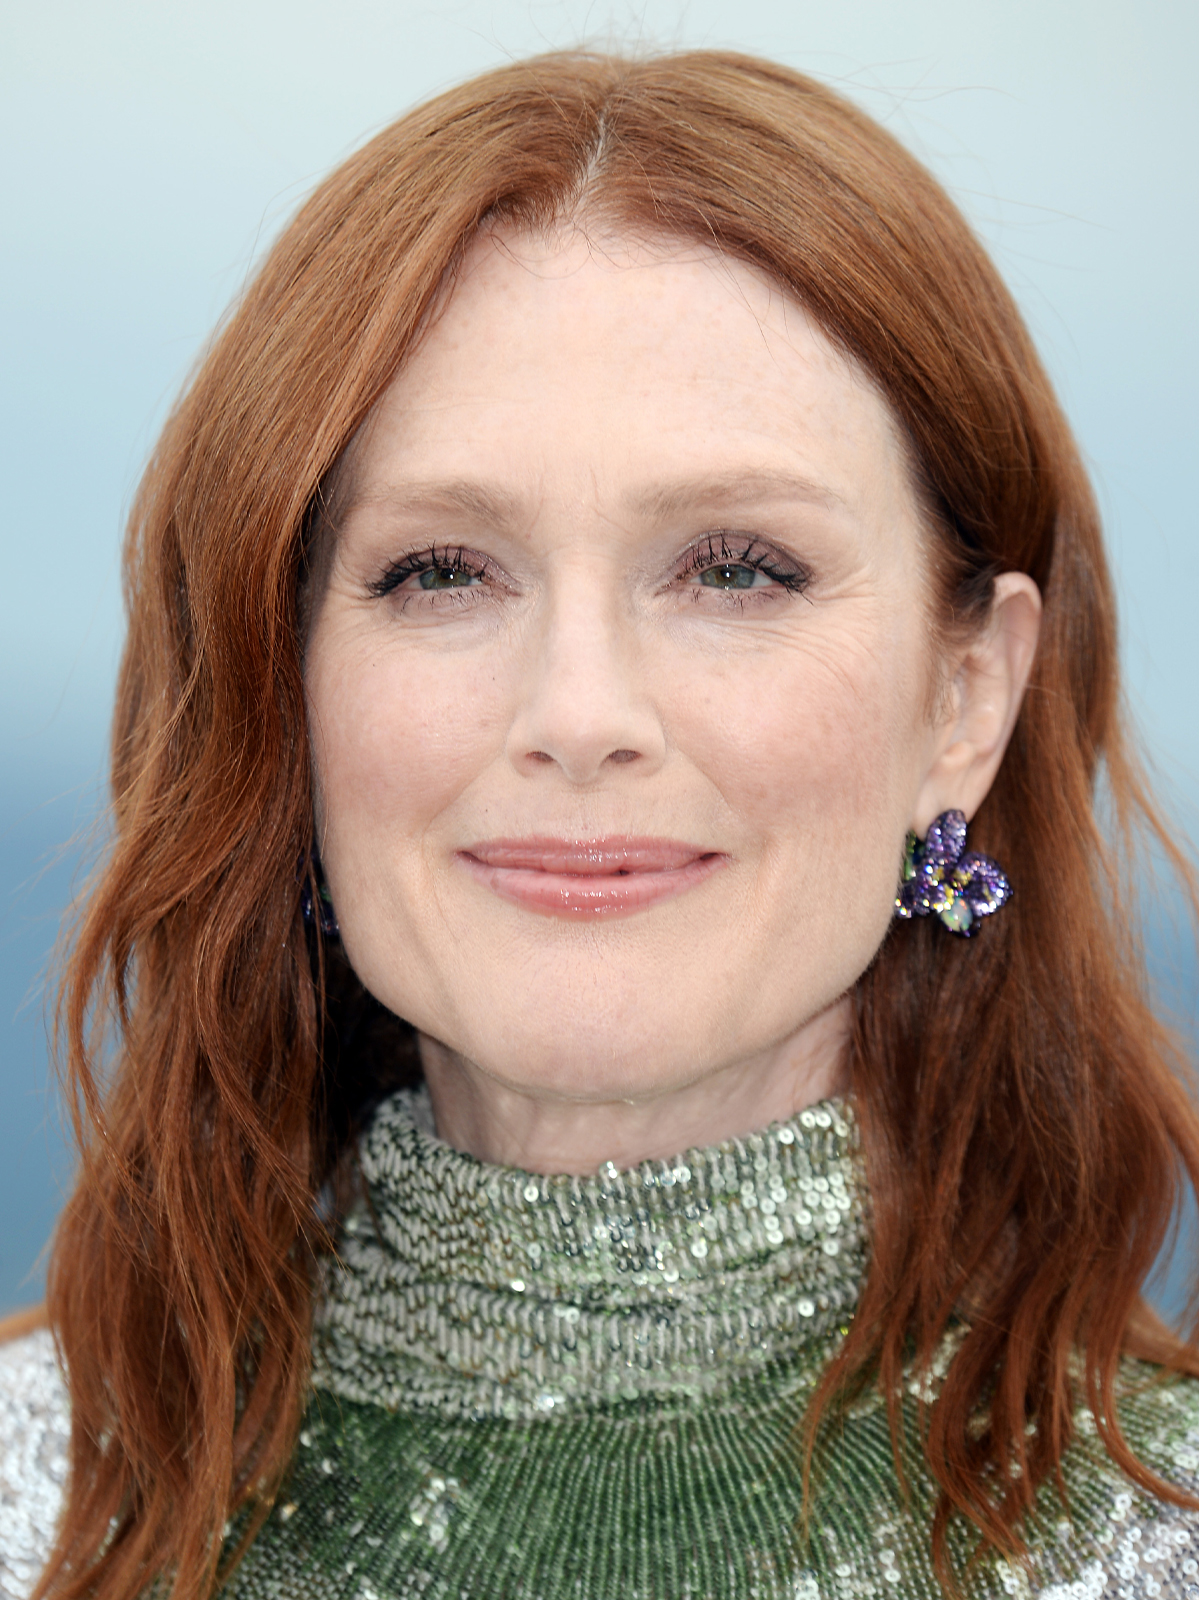 Haircuts for Women in Their 50s: Julianne Moore